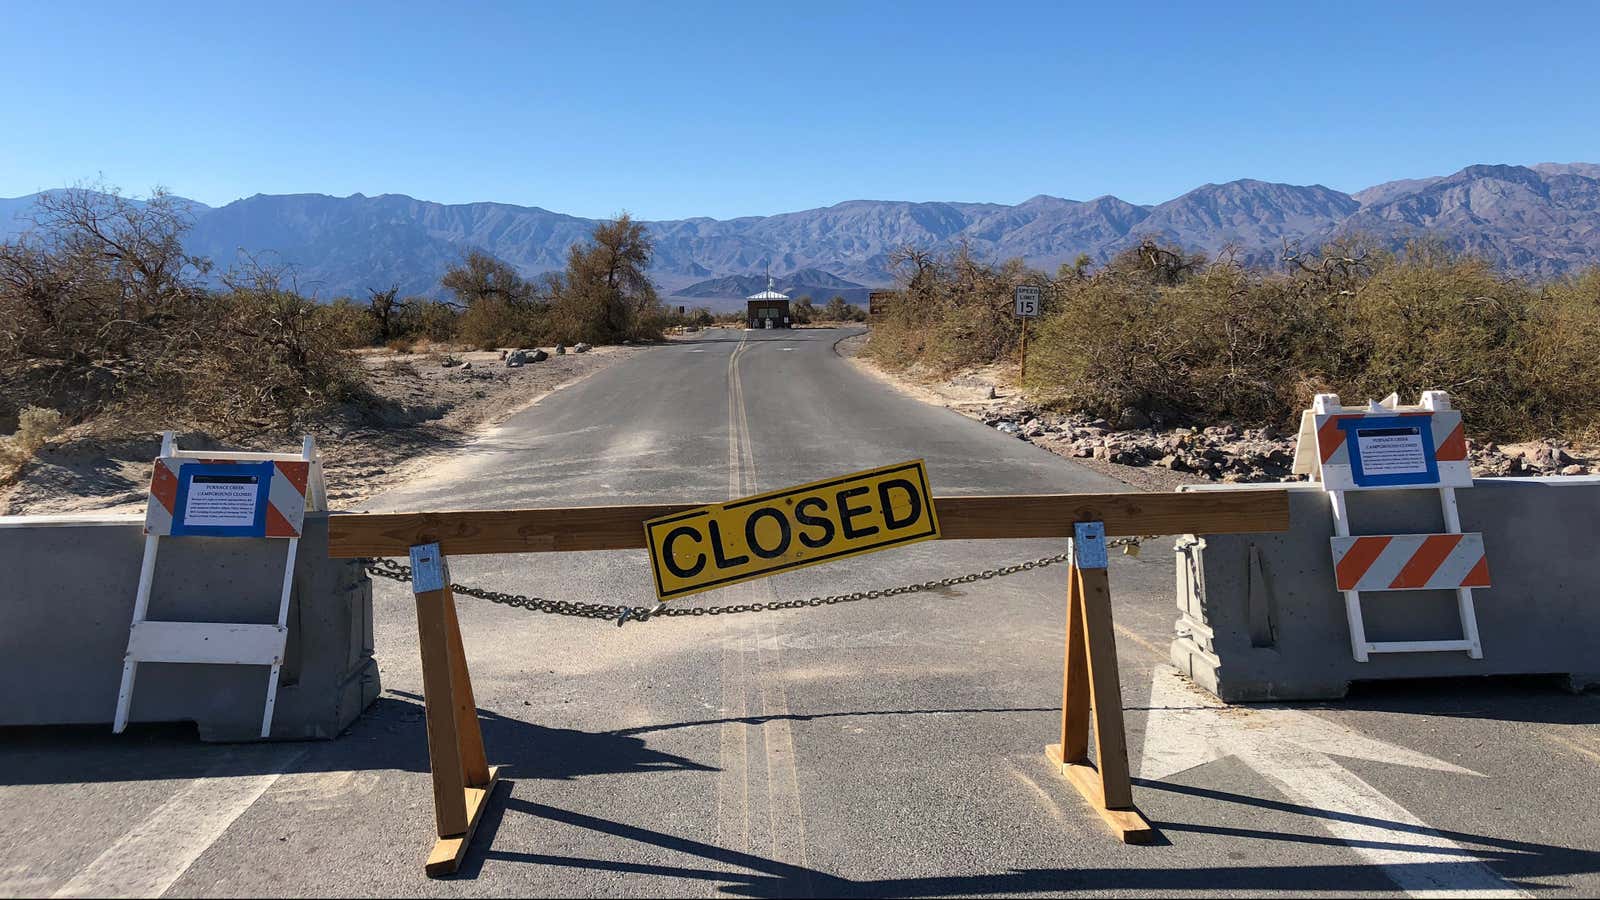 The Death Valley National Park in California, closed due to the shutdown.